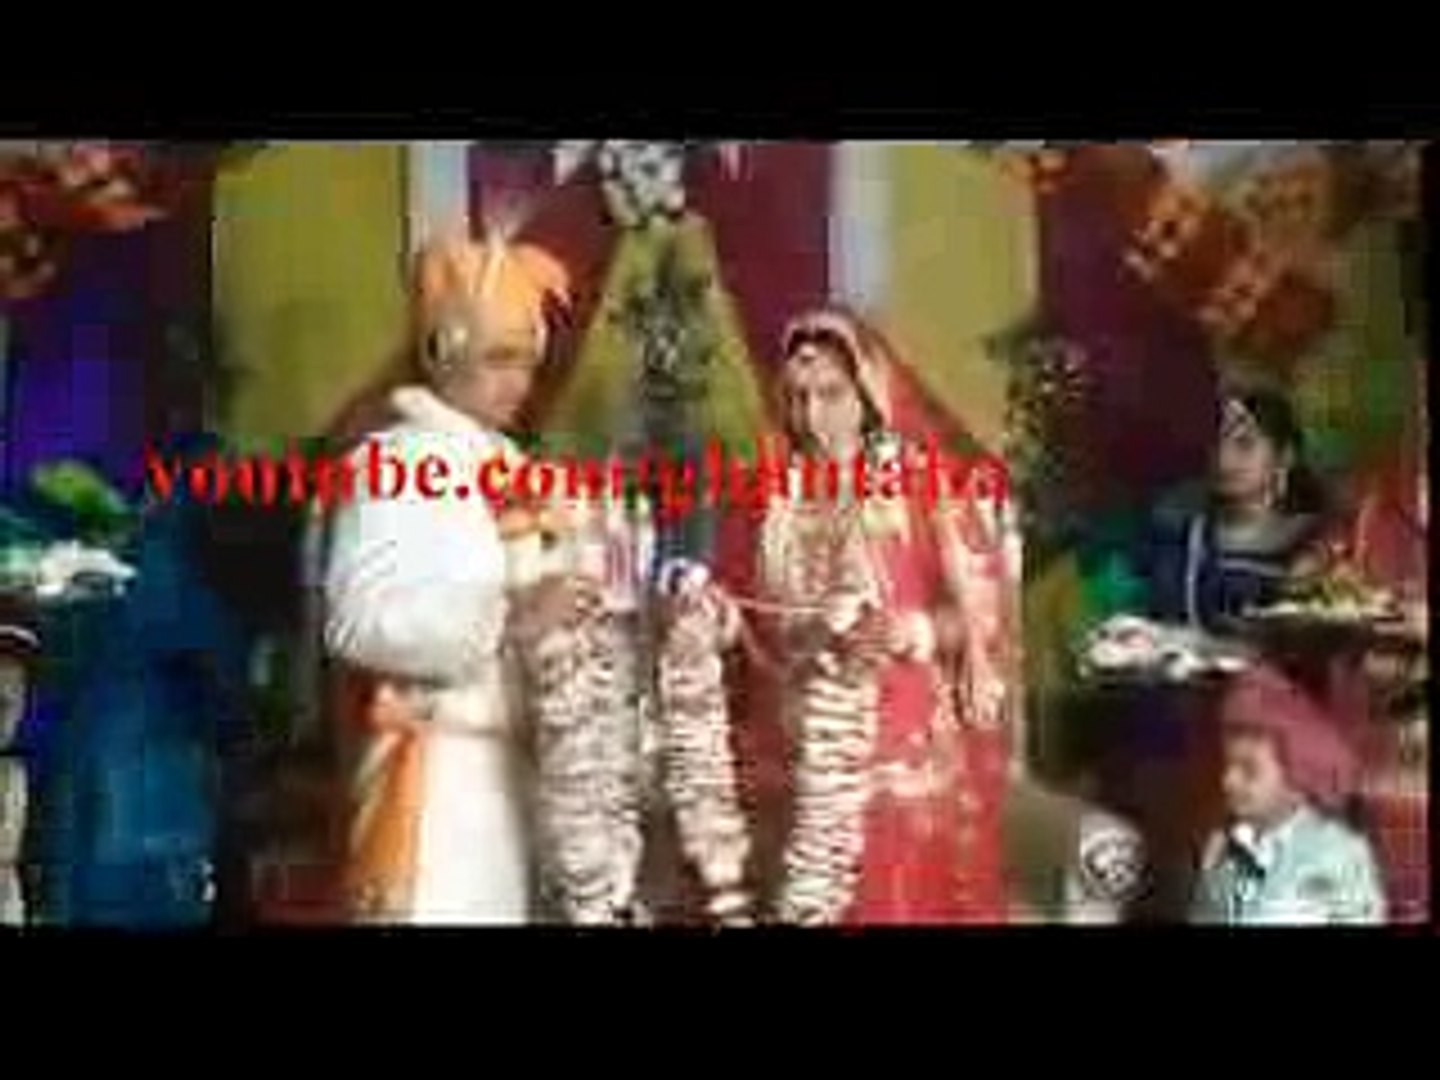 new funny marriage video 2017 Indian Pakistani bride funny entry groom  pants fall viral whatsapp - video Dailymotion